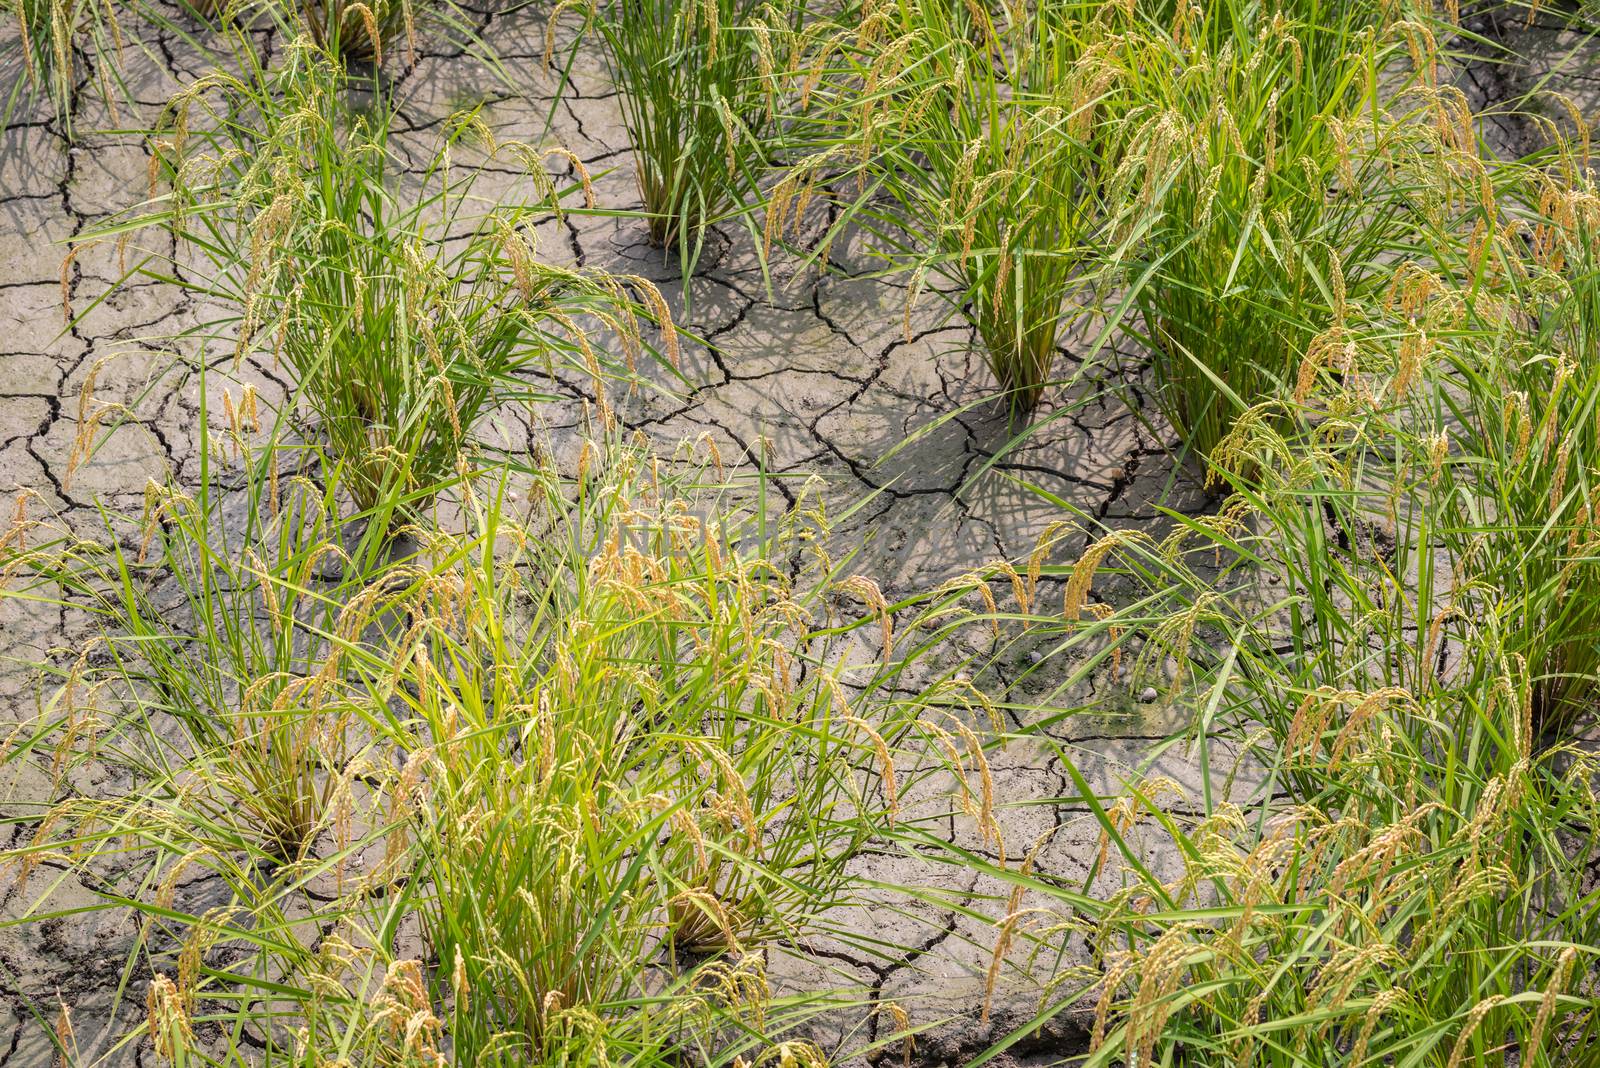 Mature rice plants growing in dry cracked dirt.